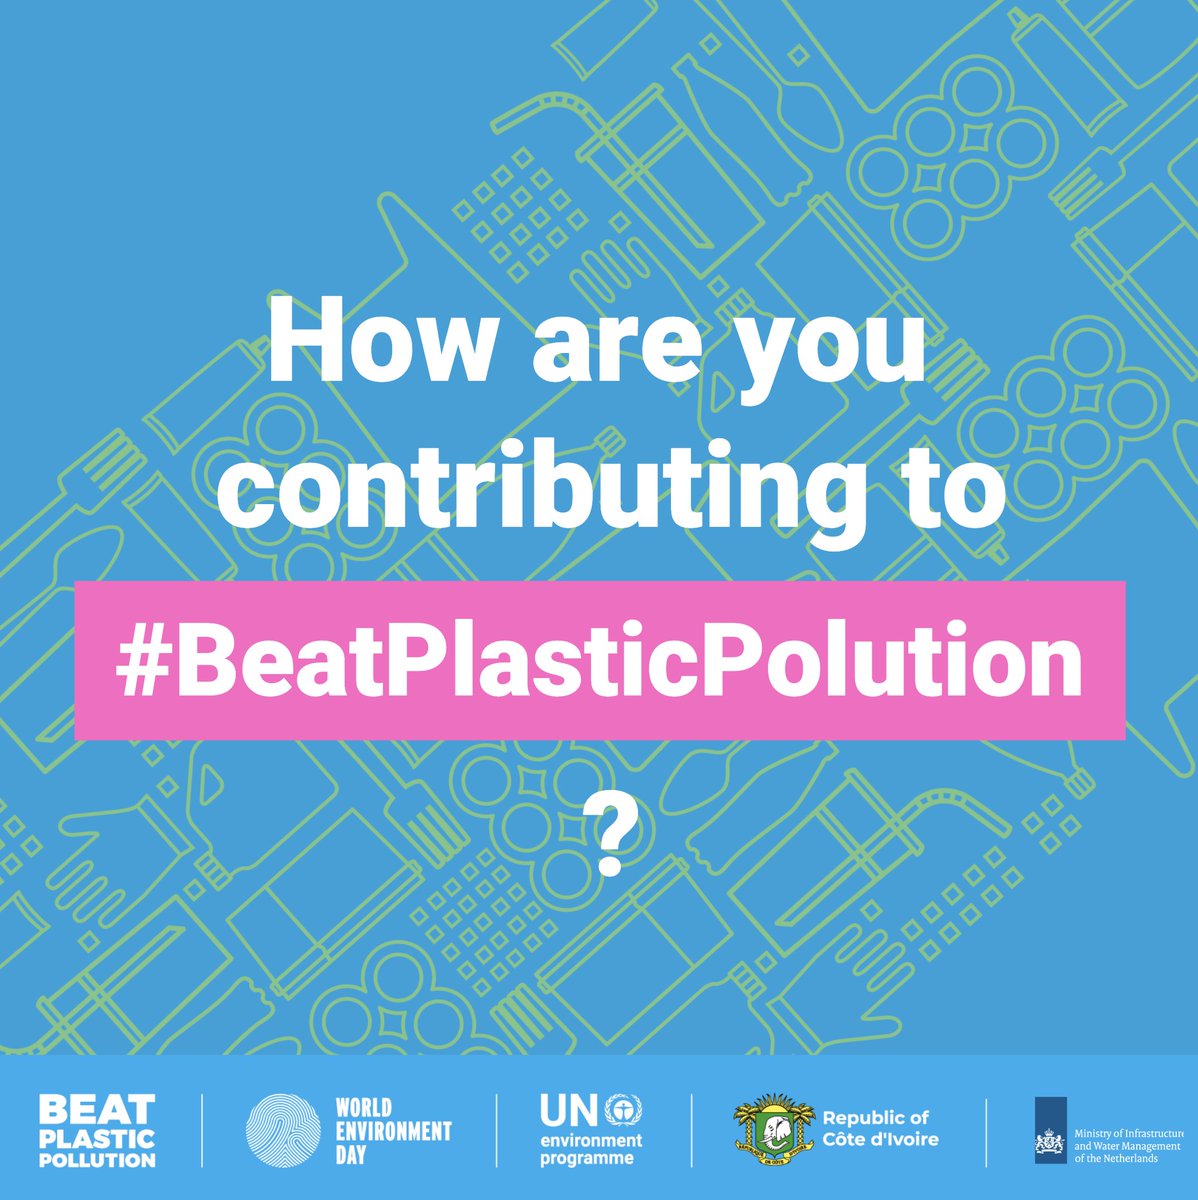 👤 Individuals
🏬 Businesses 
🏢Organisations 
🌐 & other Stakeholders 

Share with us this #WorldEnvironmentDay how you are contributing to #BeatPlasticPolution. 🌍